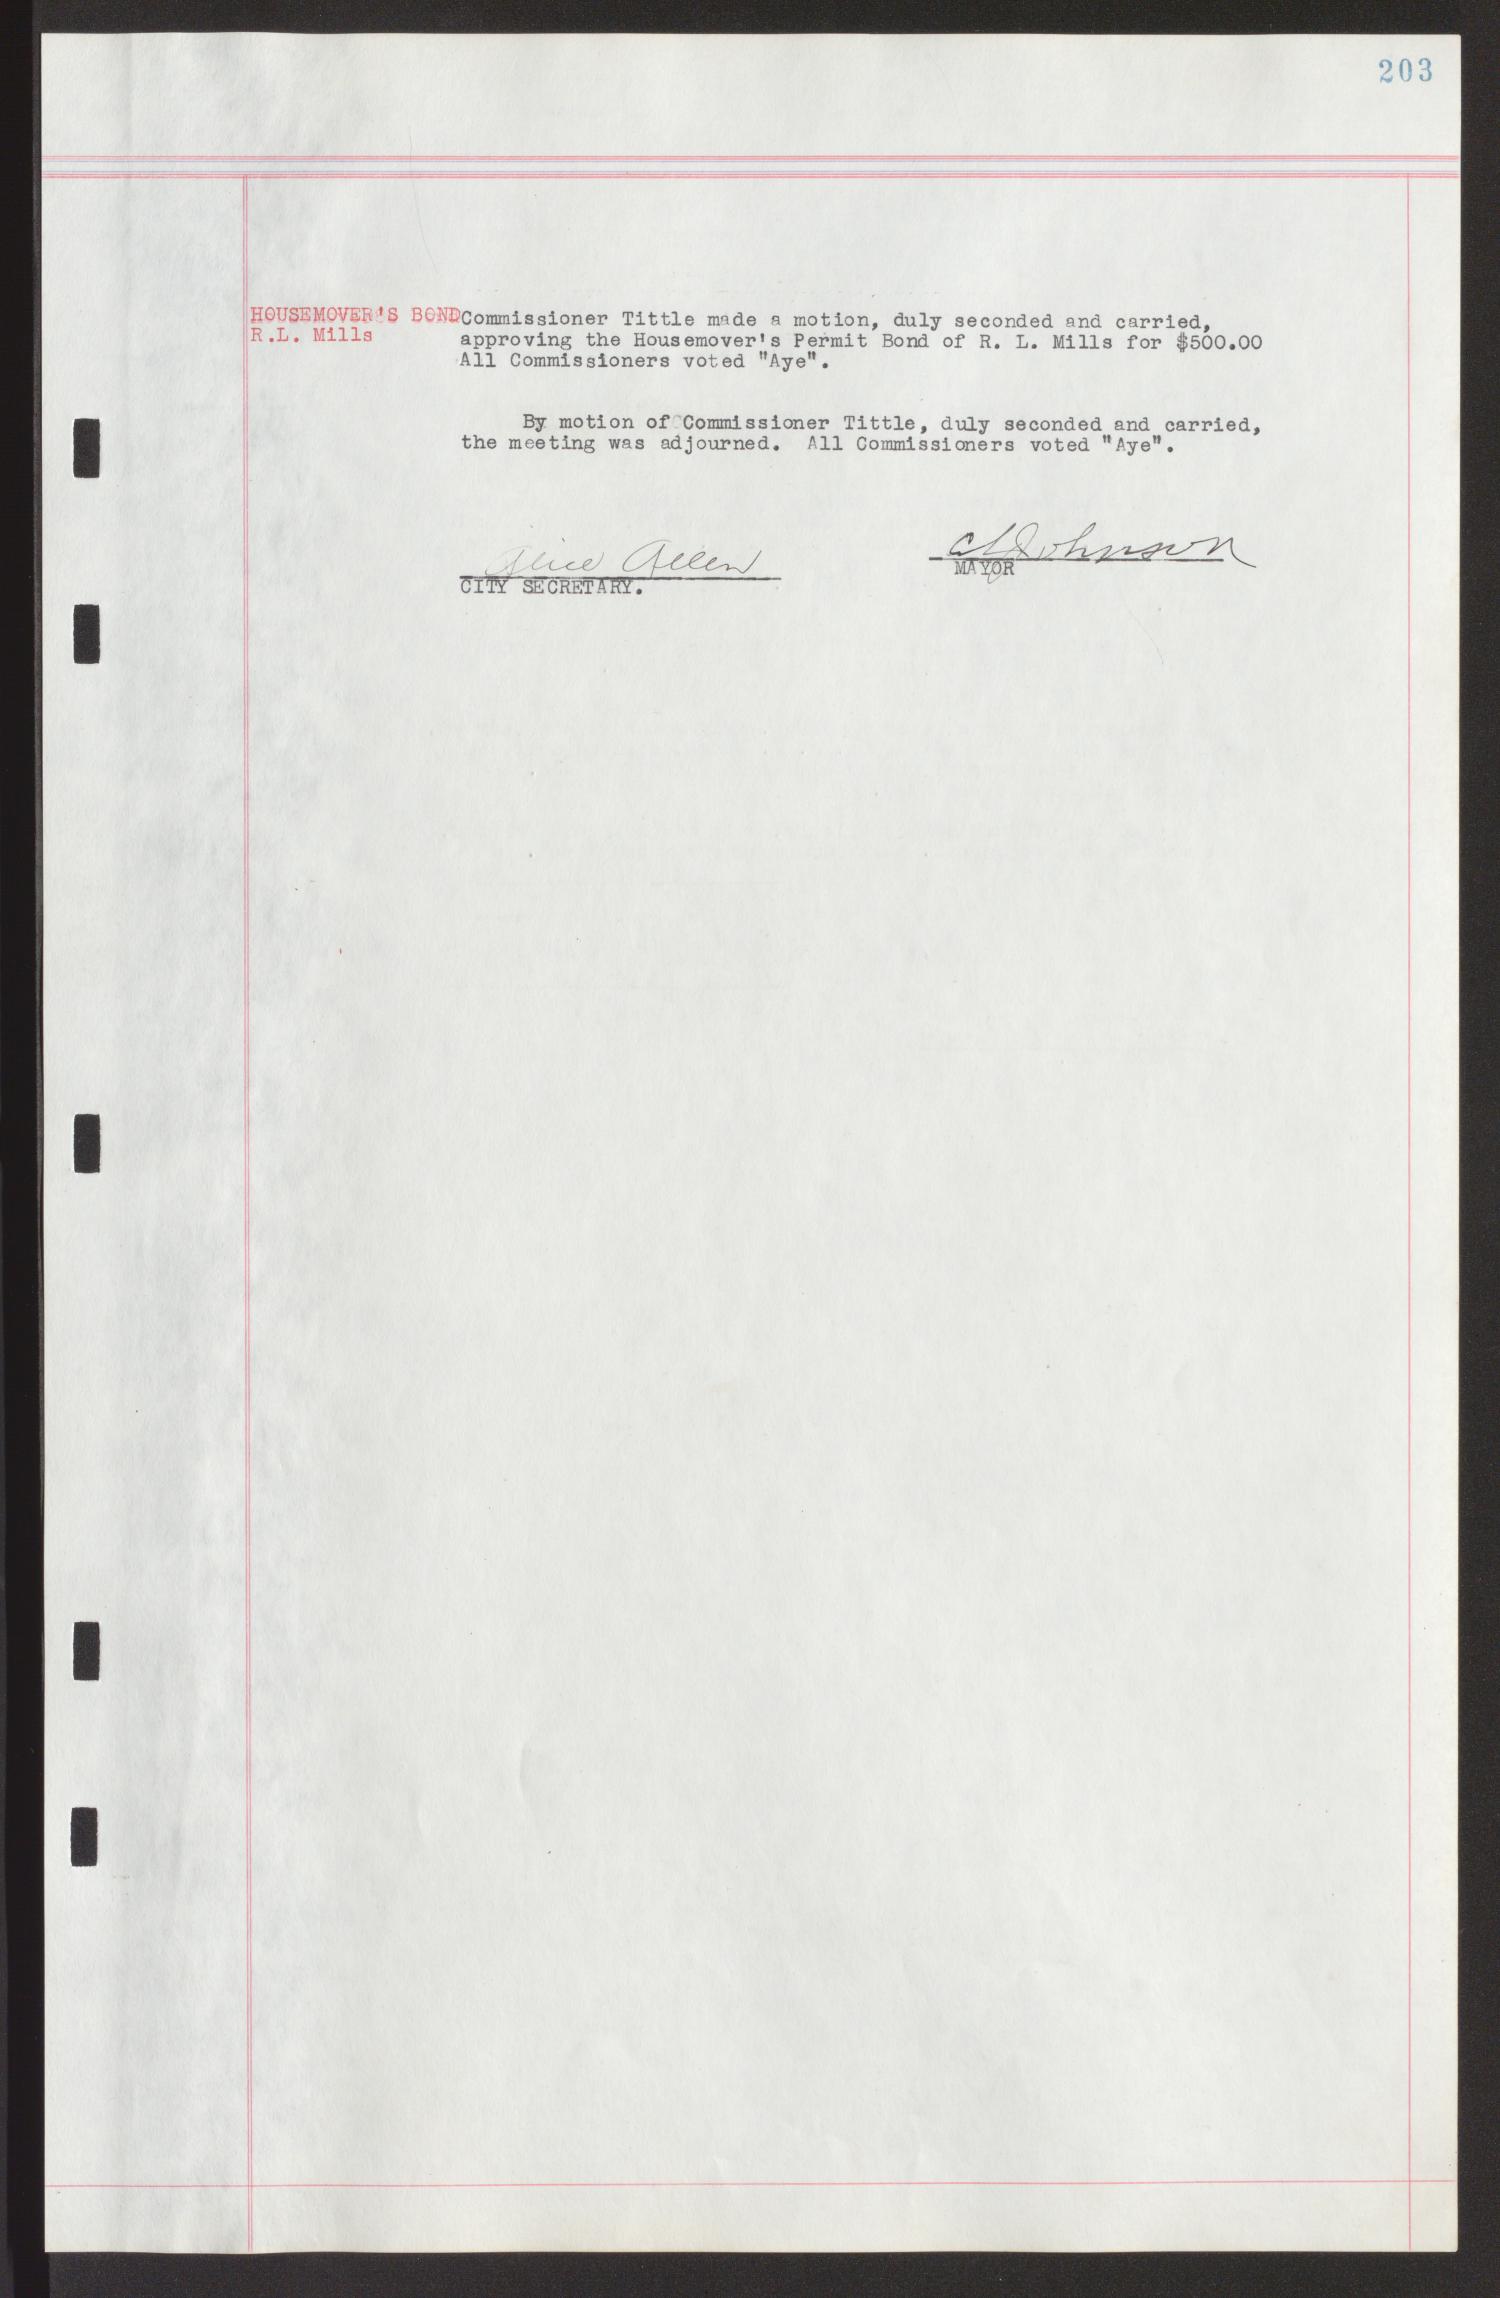 [Abilene Board of Commissioners Minutes: 1931-1938]
                                                
                                                    203
                                                